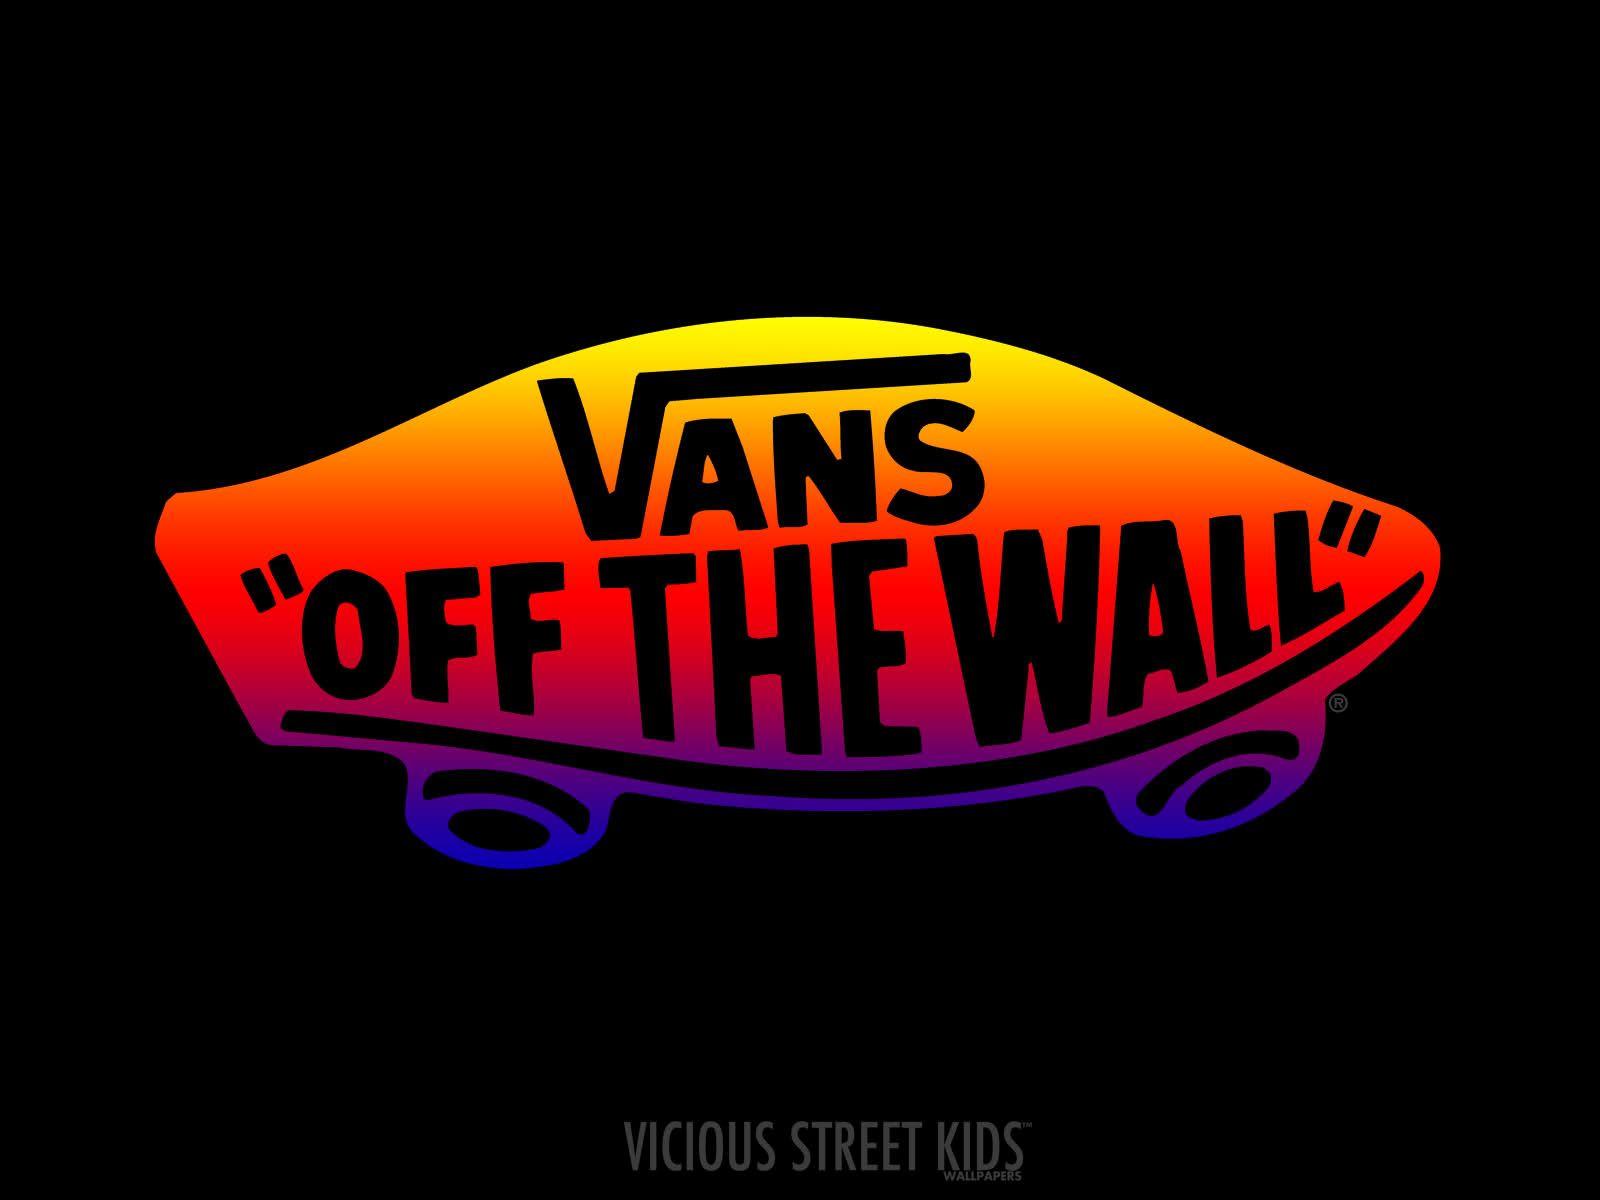 Colorful Vans Logo - Vans Off the Wall Wallpaper - Wallpapers Browse